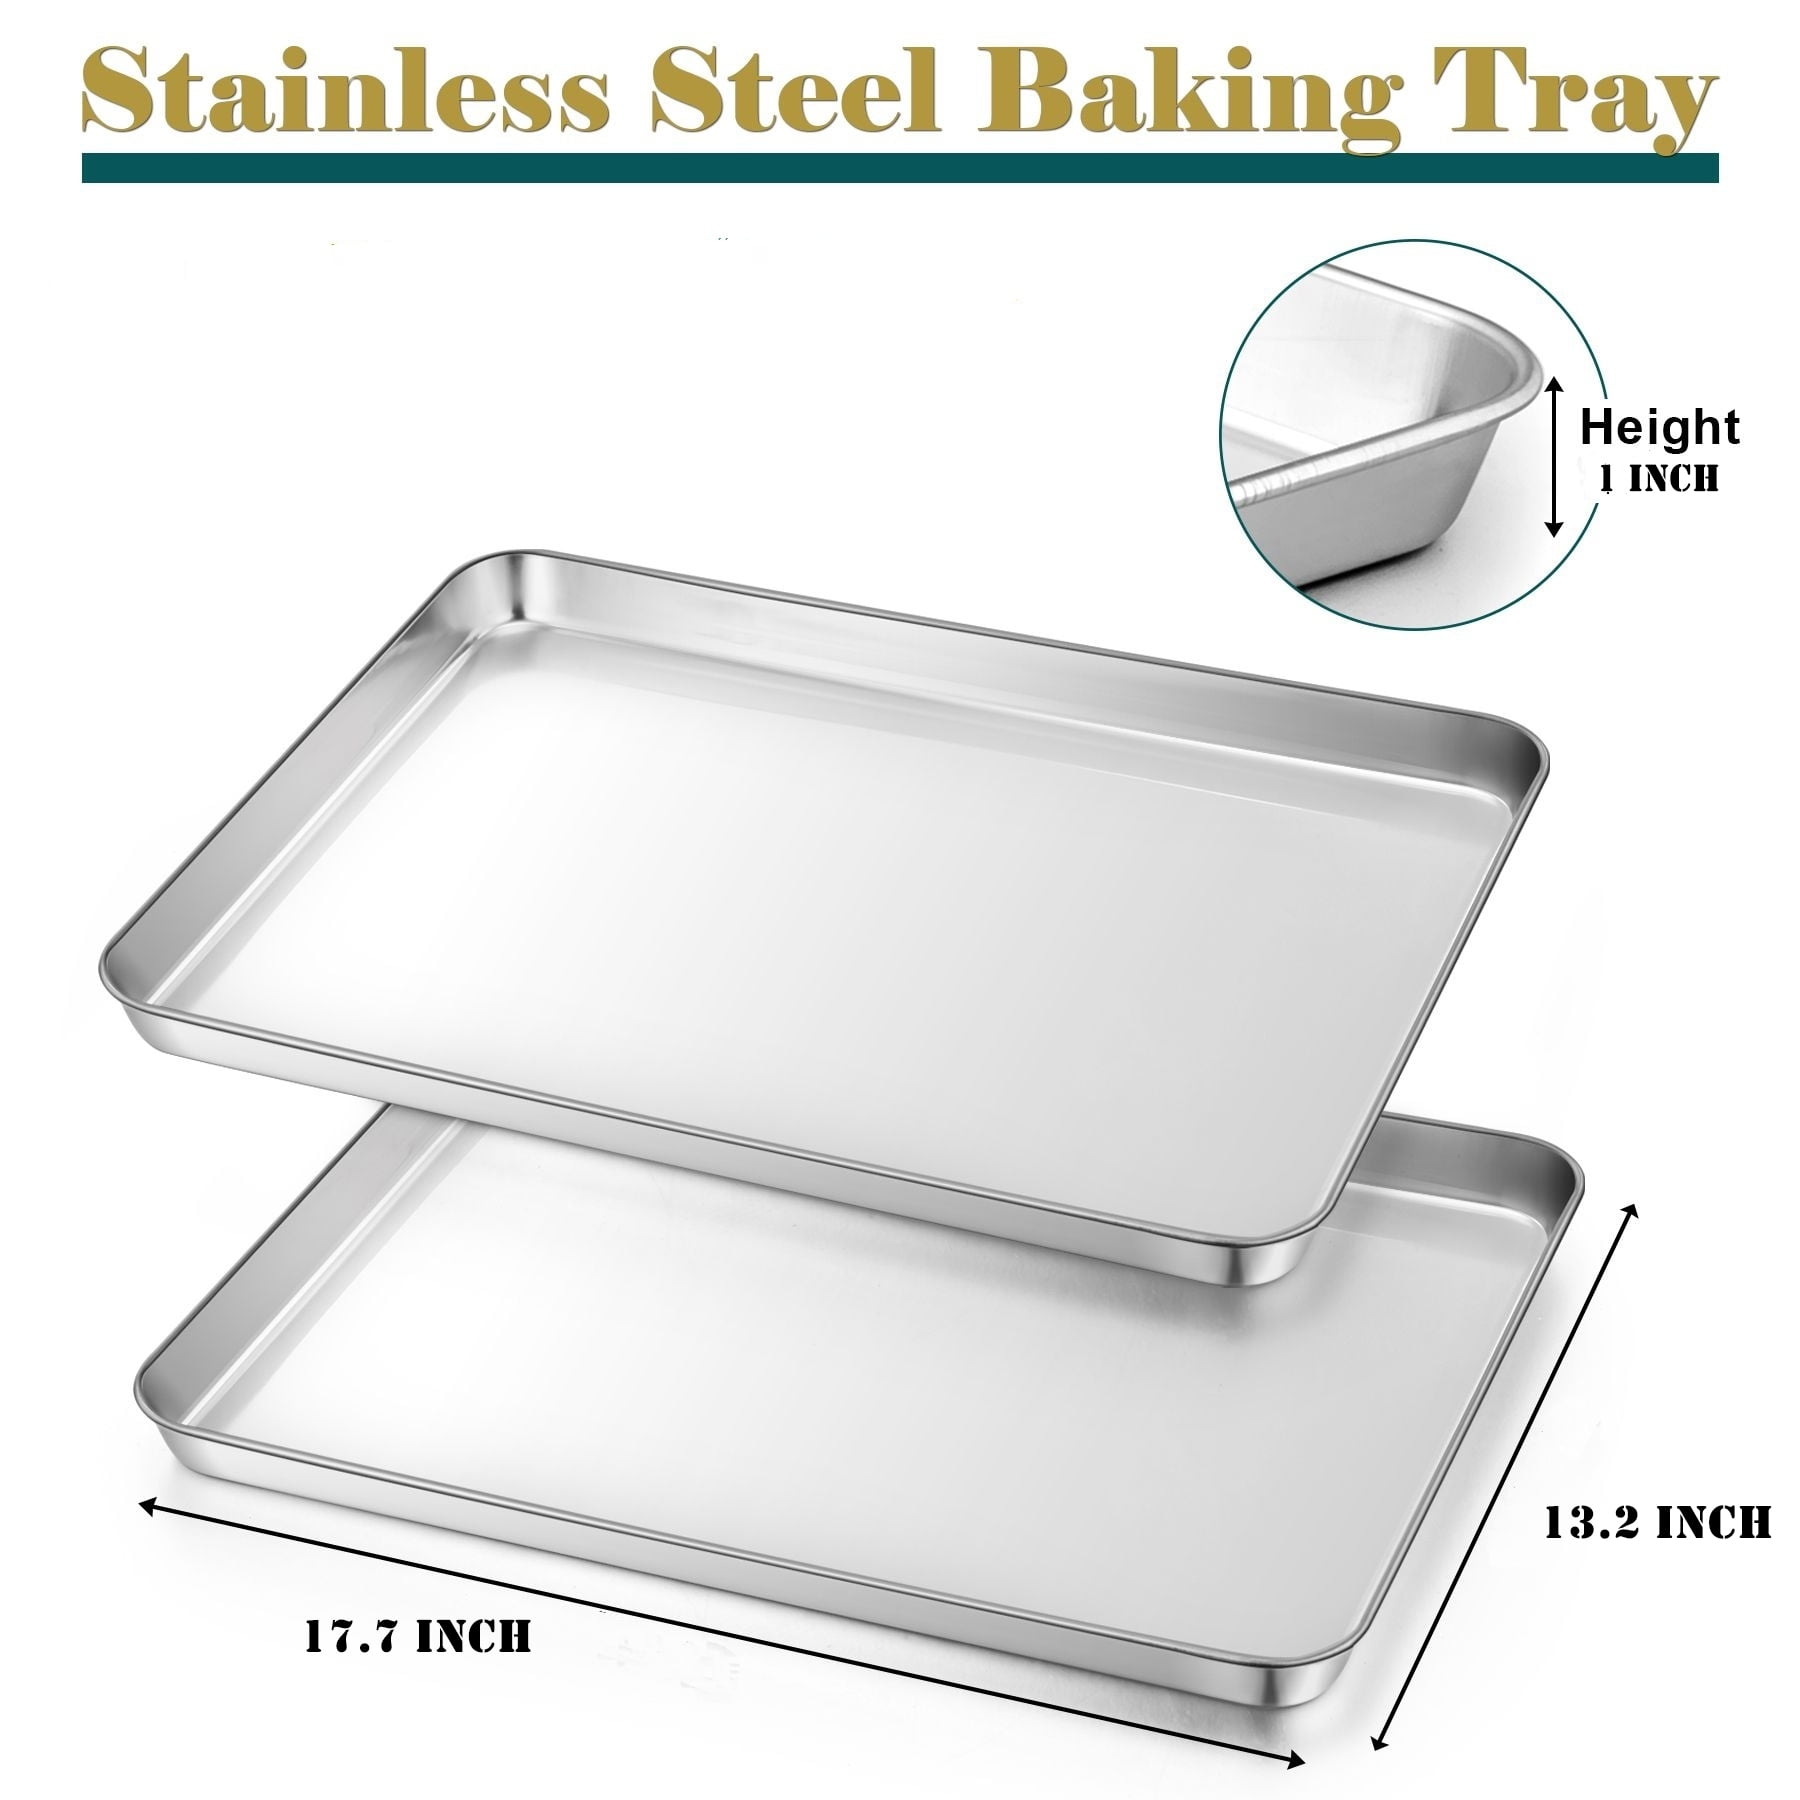 Walchoice Stainless Steel Baking Sheets, Professional Cookie Sheet Set of 2, Metal Oven Trays, Size: 16 x 12 x 1, Silver